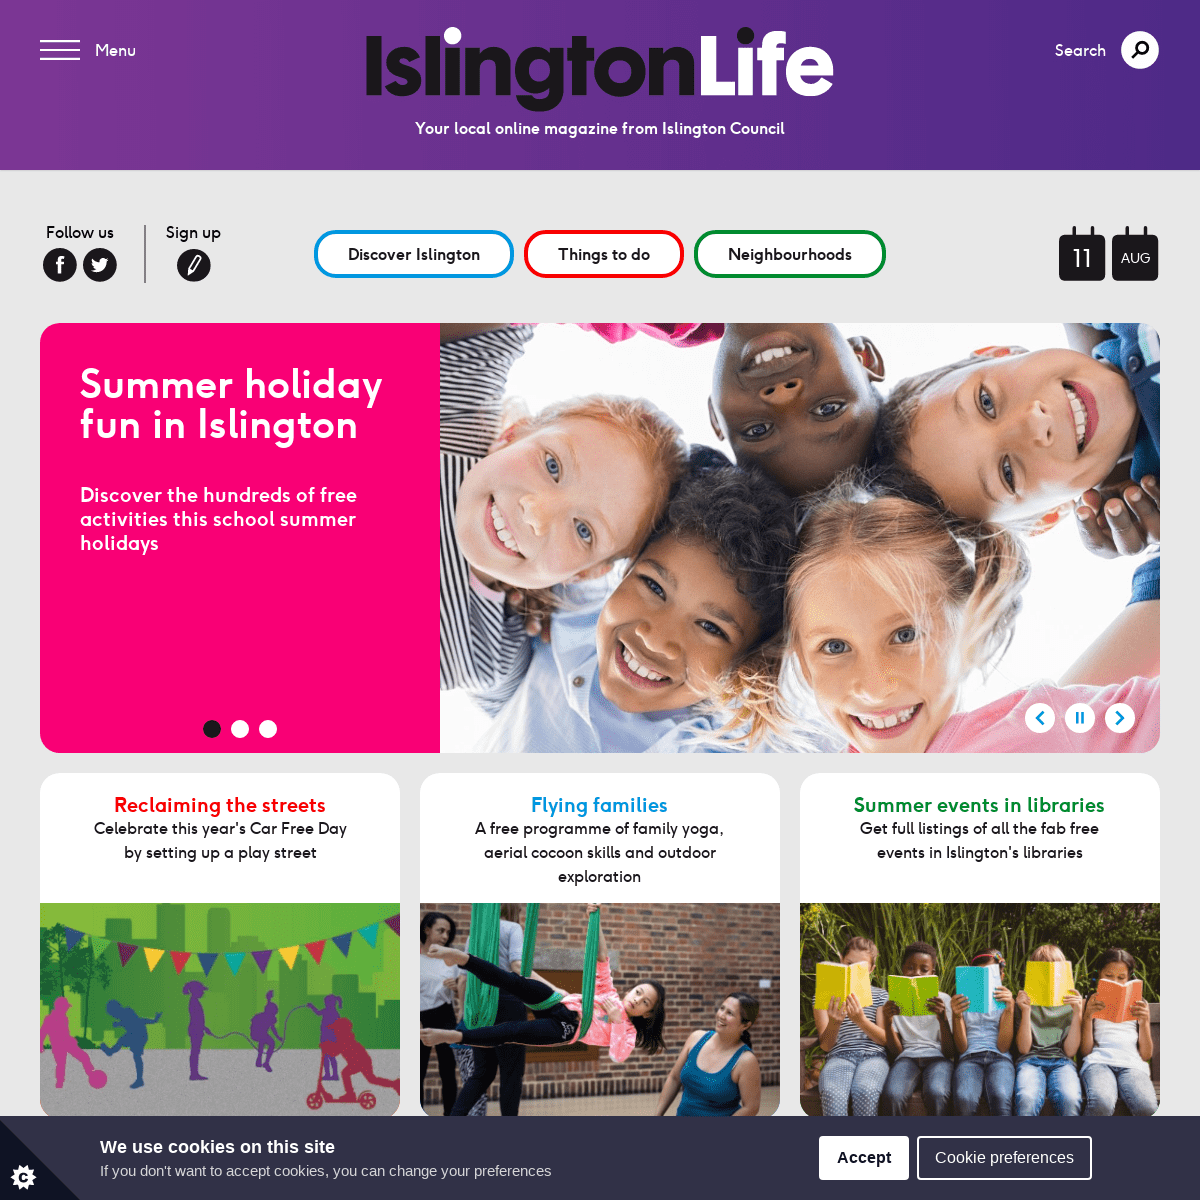 IslingtonLife - Your local online magazine from Islington Council